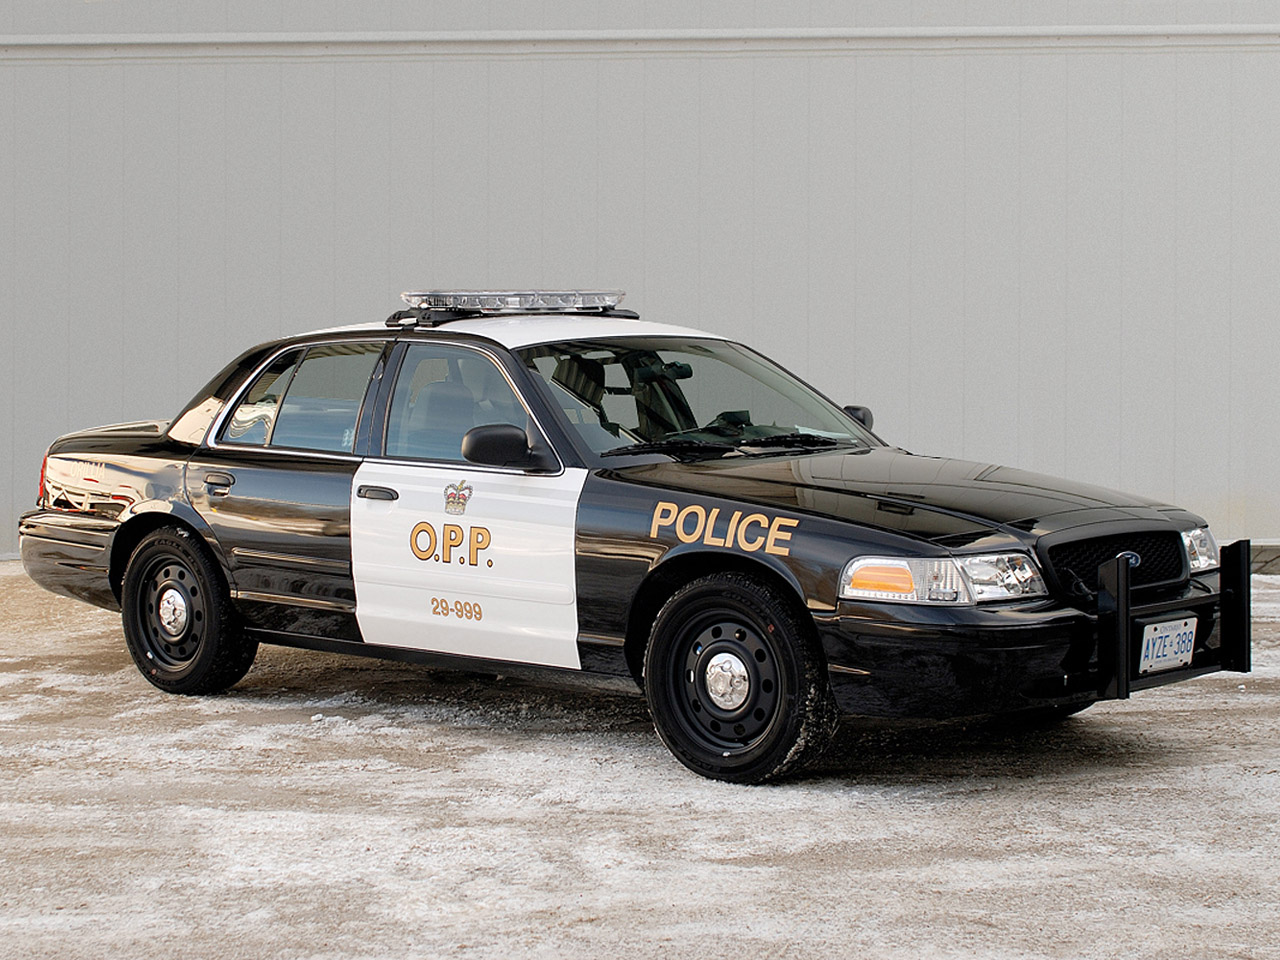 The specifications for a 1989 ford crown victoria police car #9